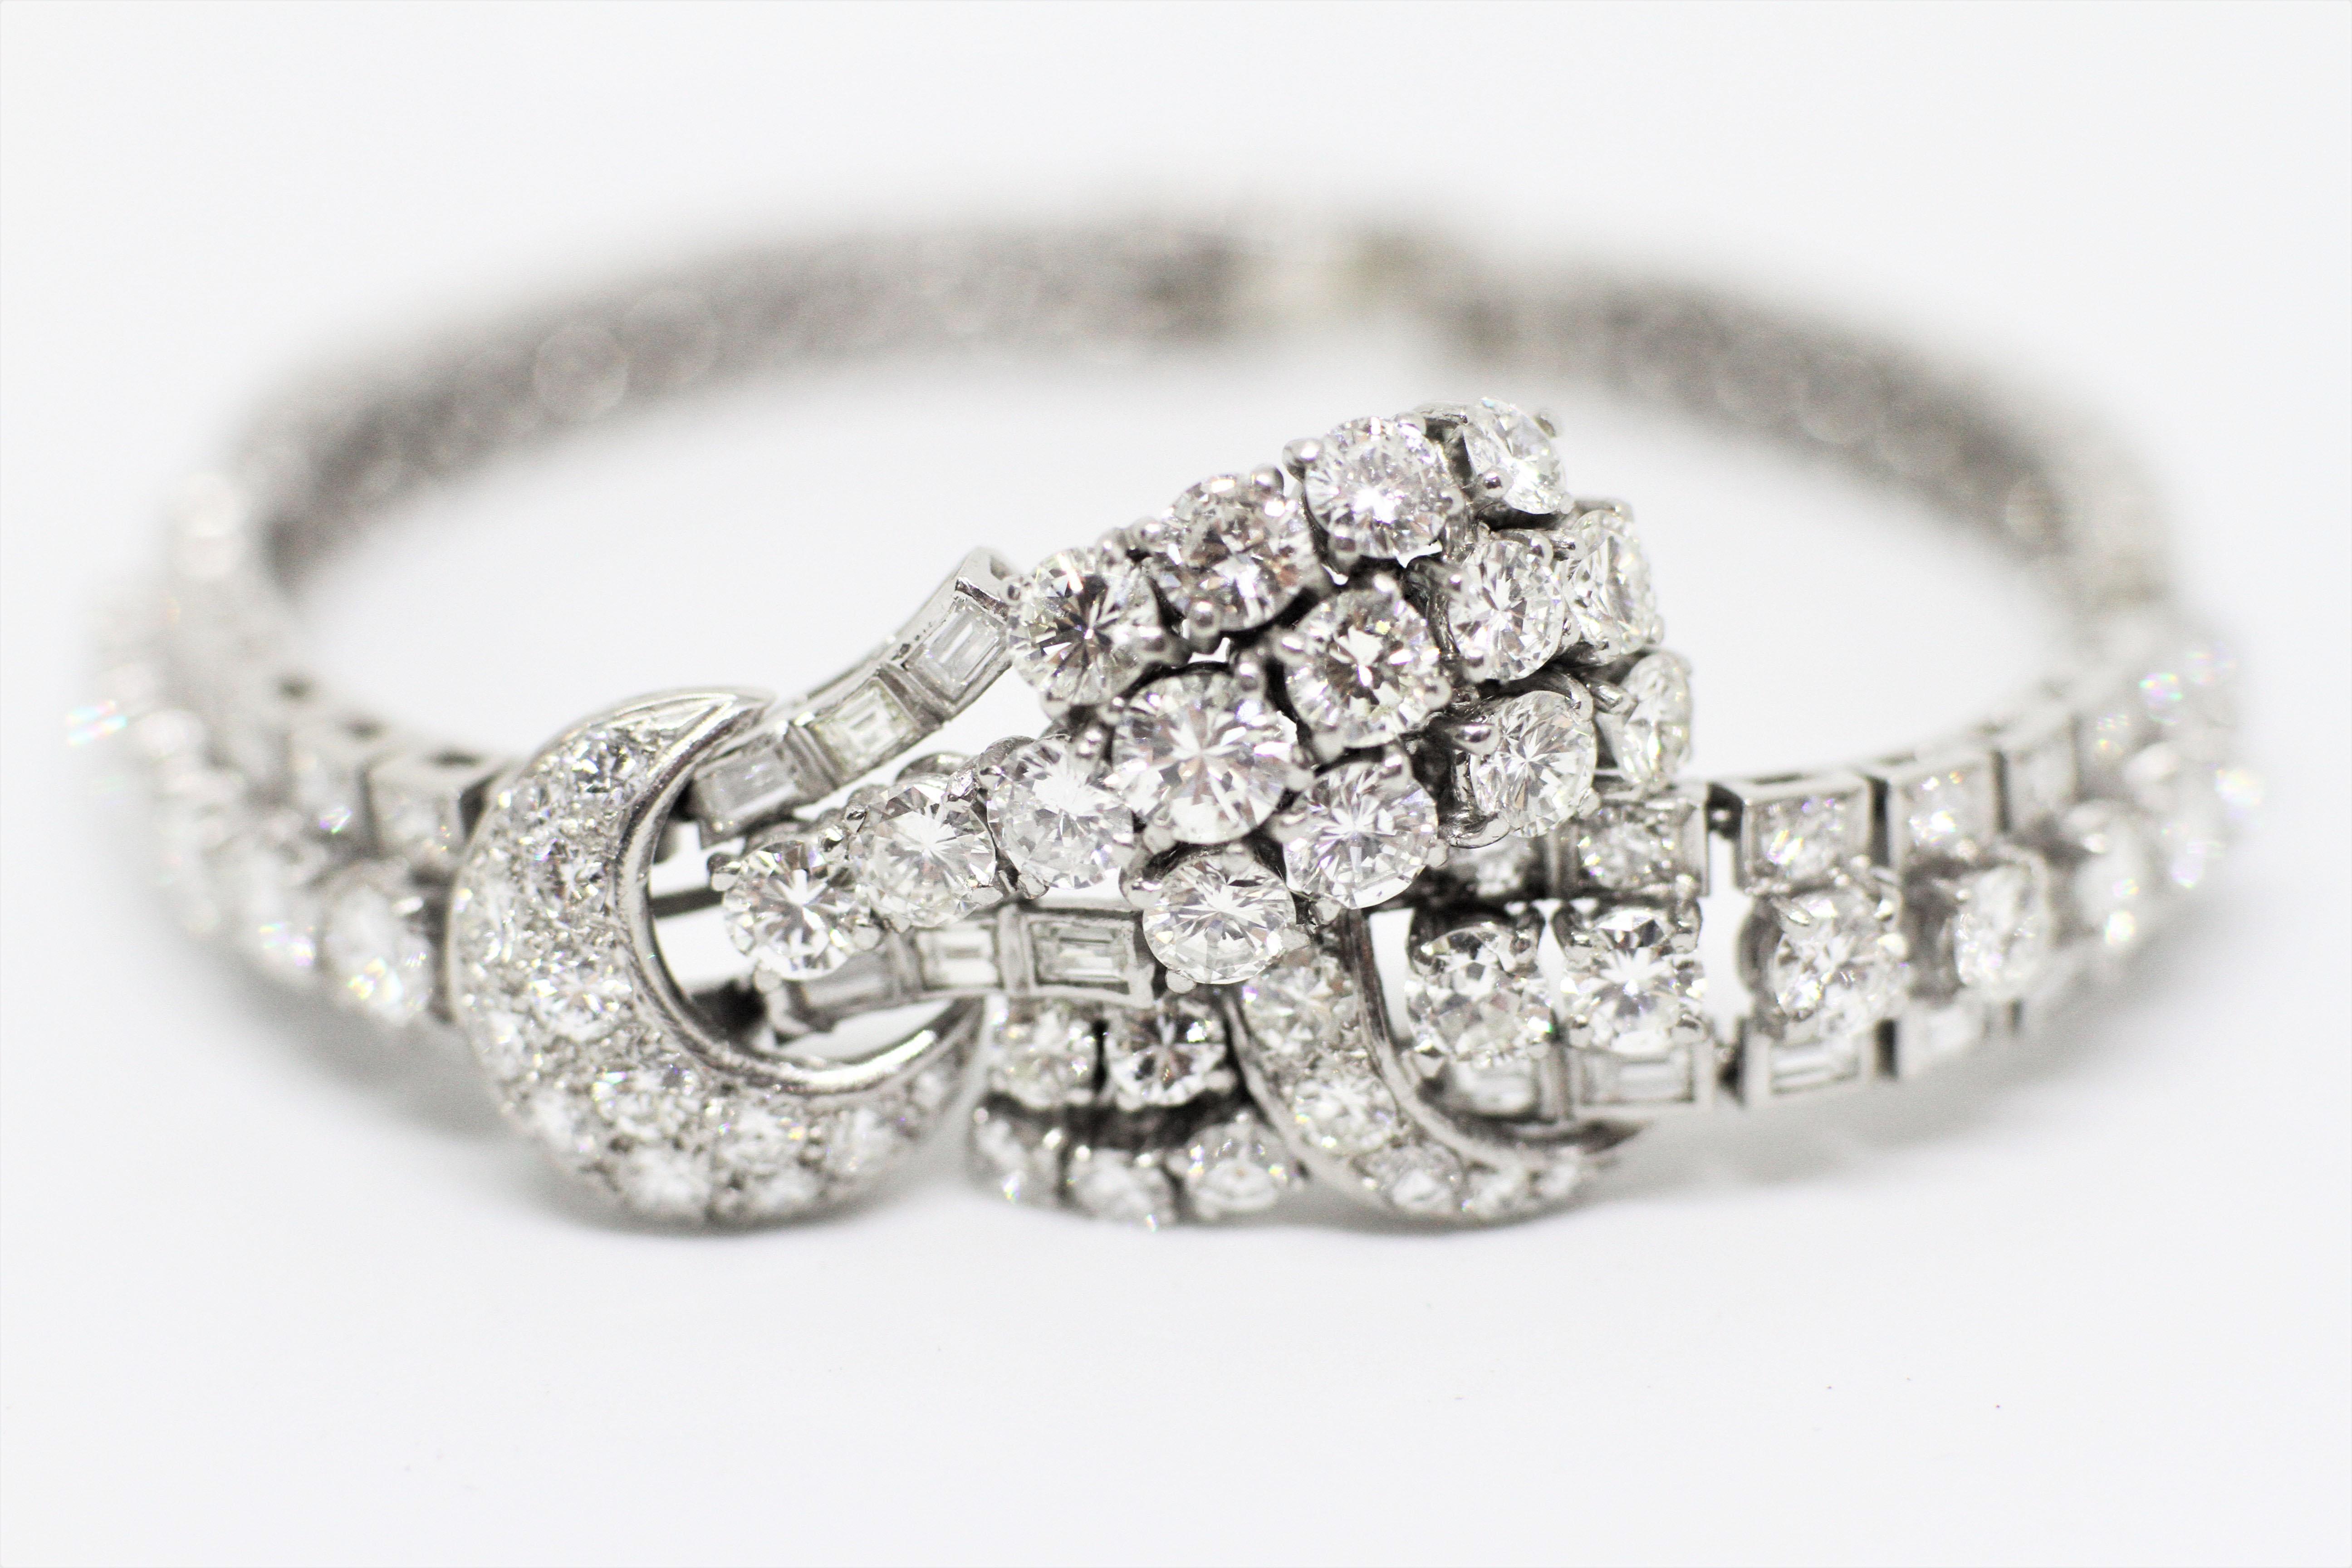 Vintage all diamond sectioned cocktail bracelet set with round brilliant cut diamonds and baguette cut diamonds in open back channel, claw and rub-over settings with a combined approximate weight of 14.00 carats.  Approximately 7